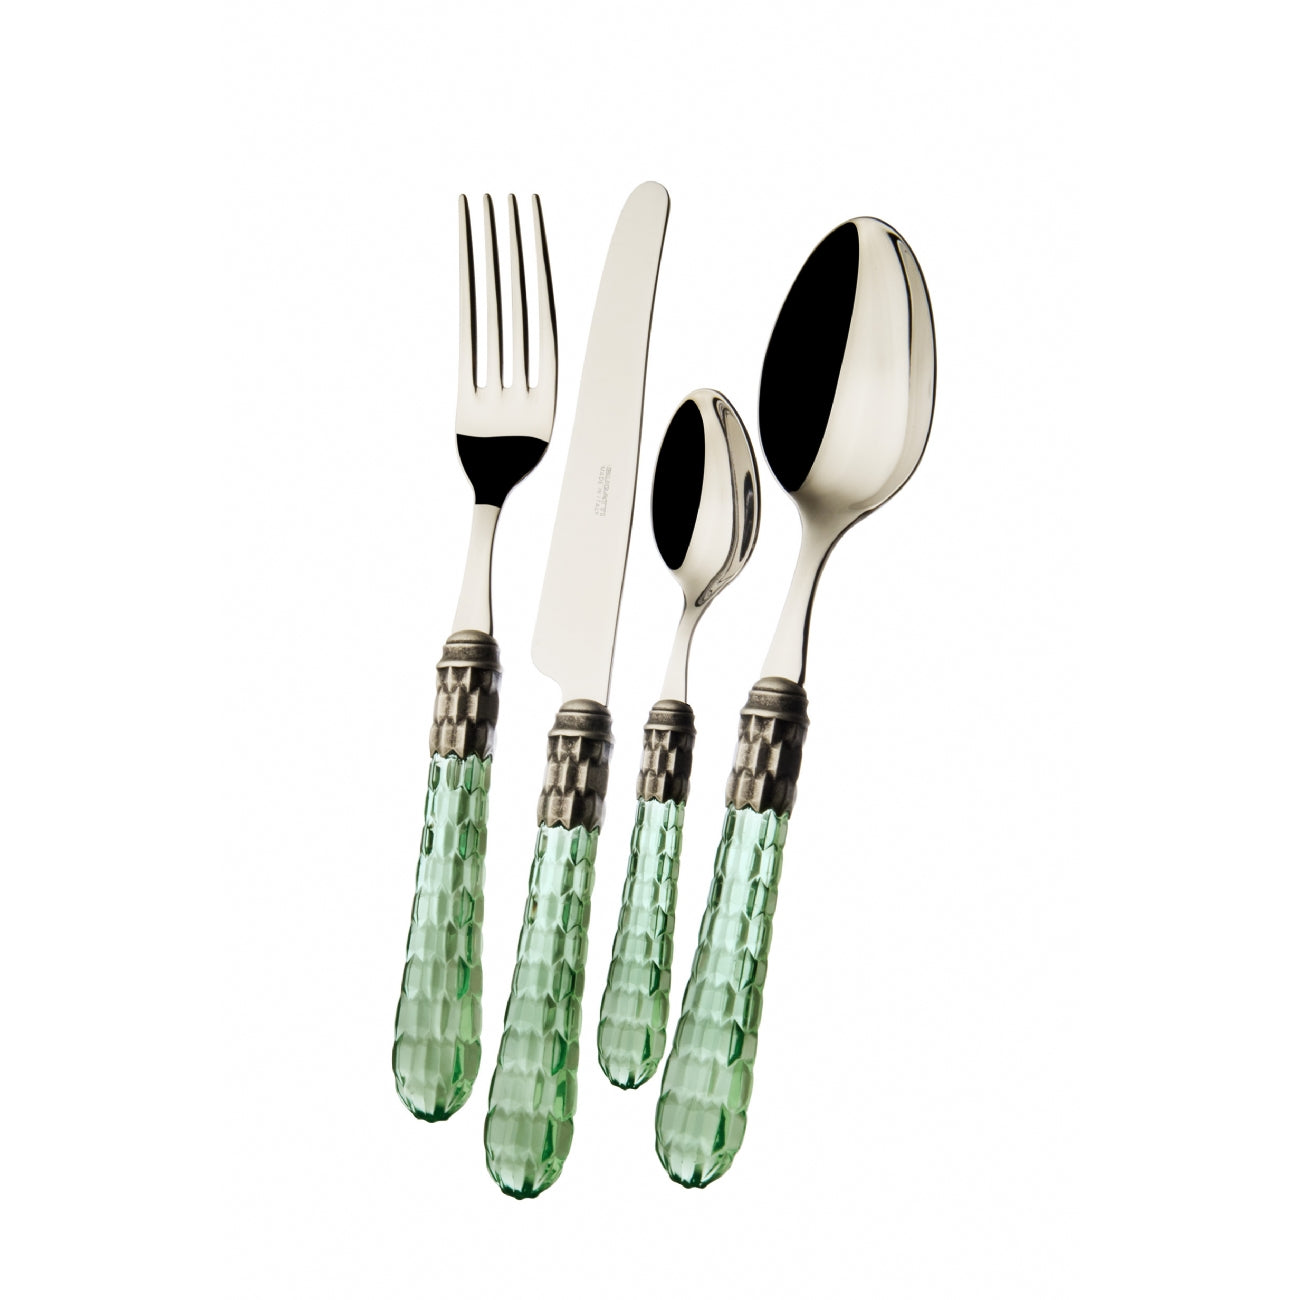 BUGATTI, Cristallo, 24-piece cutlery set in 18/10 stainless steel with antique silver ring and green handle